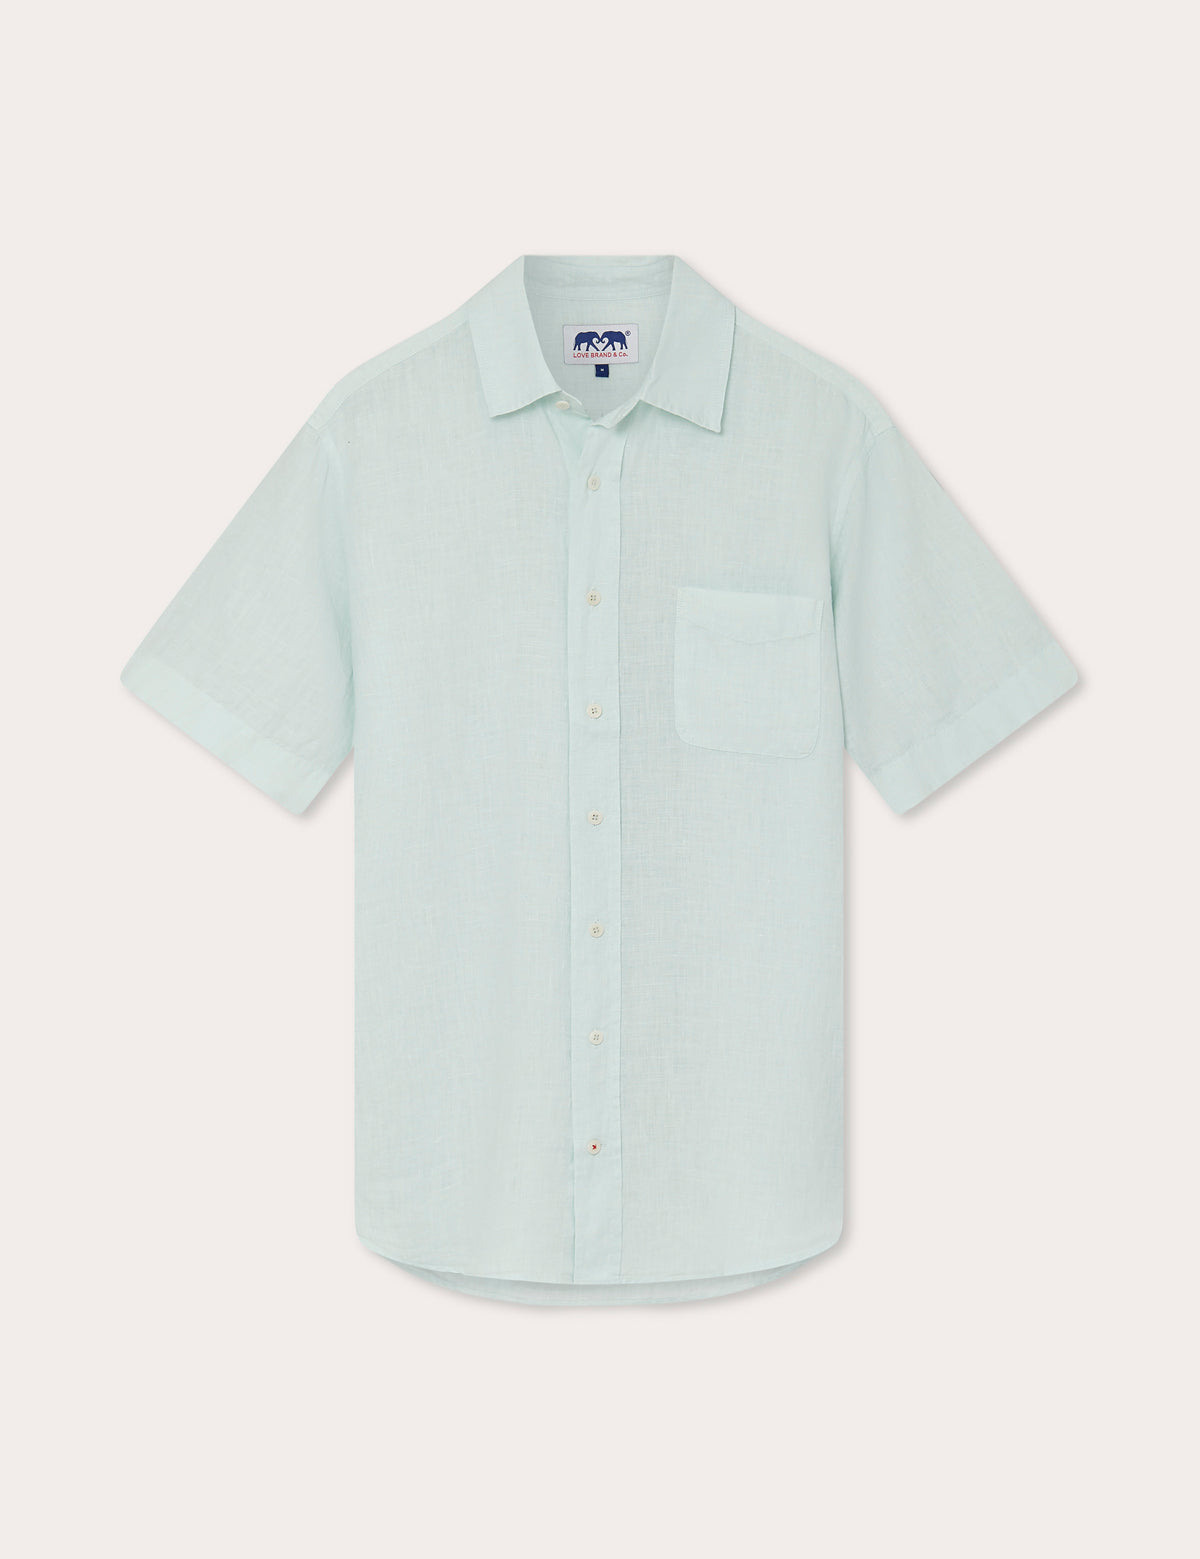 Men's Sea Air Manjack Linen Shirt in pastel hue, short-sleeved, button-down, chest pocket, lightweight and breathable.